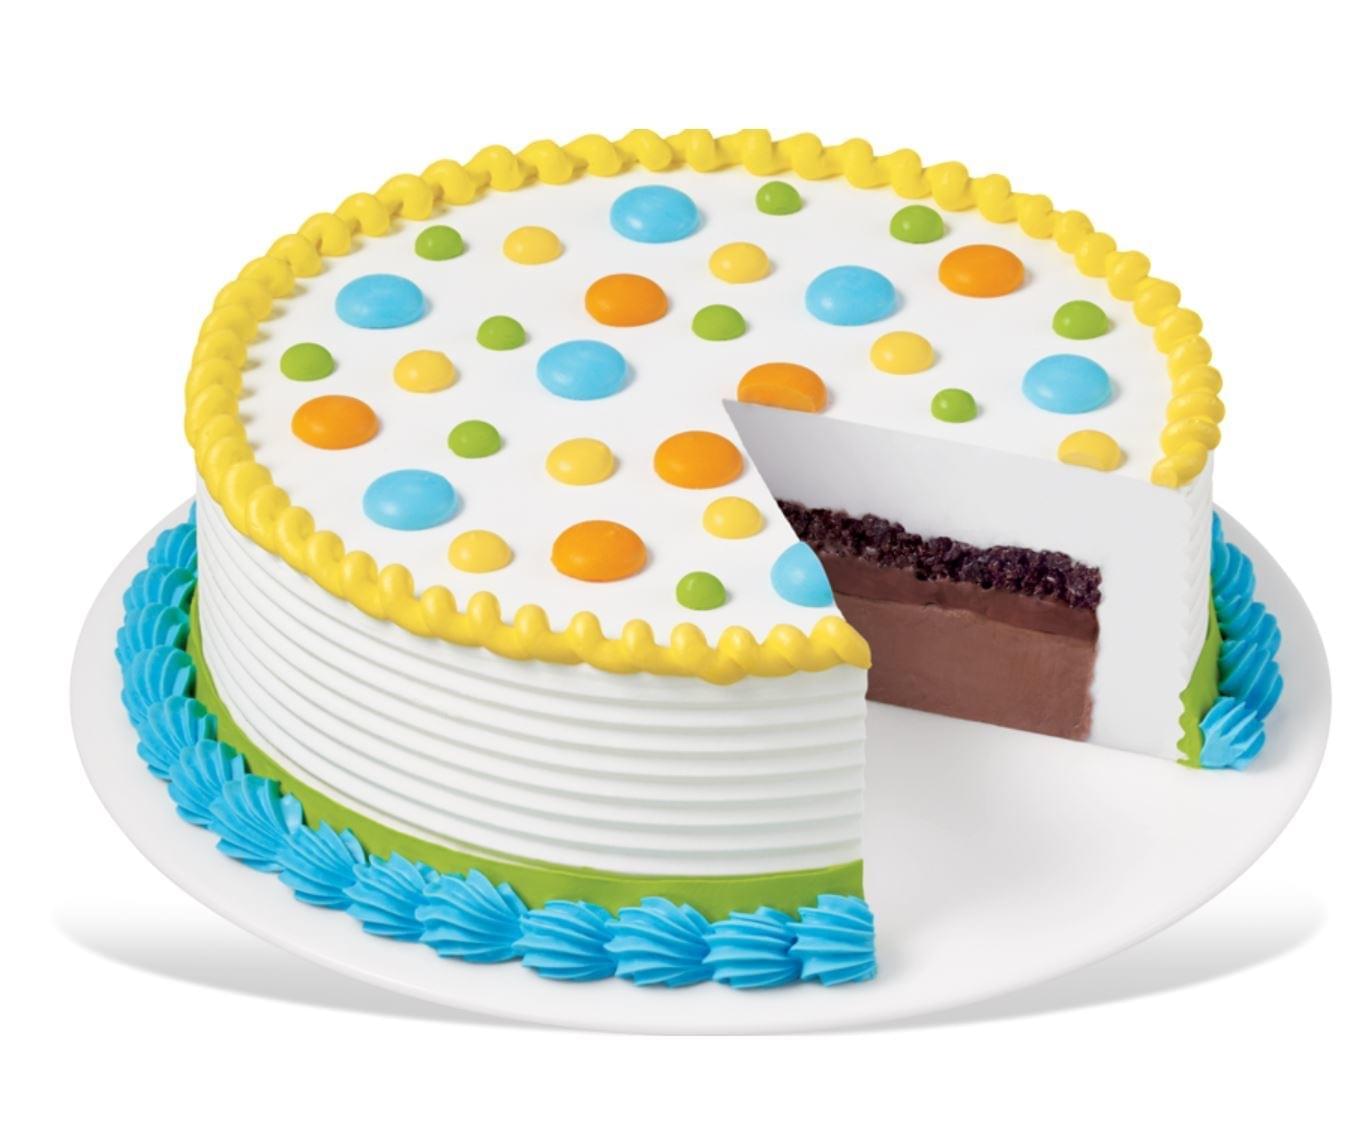 Dairy Queen DQ Round Cake Nutrition Facts